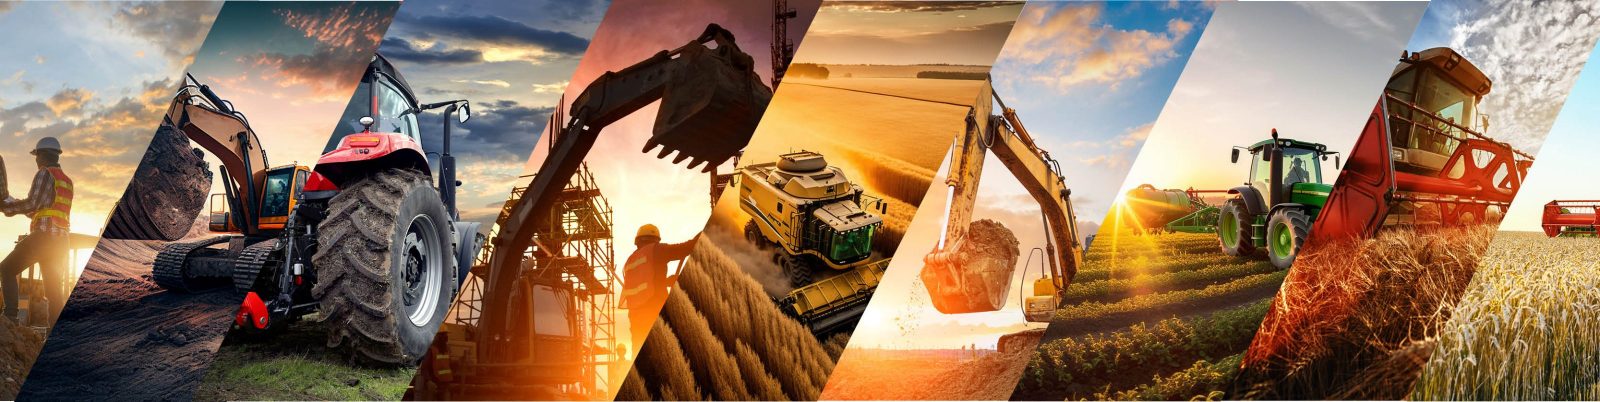 Agricultural, Construction & Earth Moving Equipment